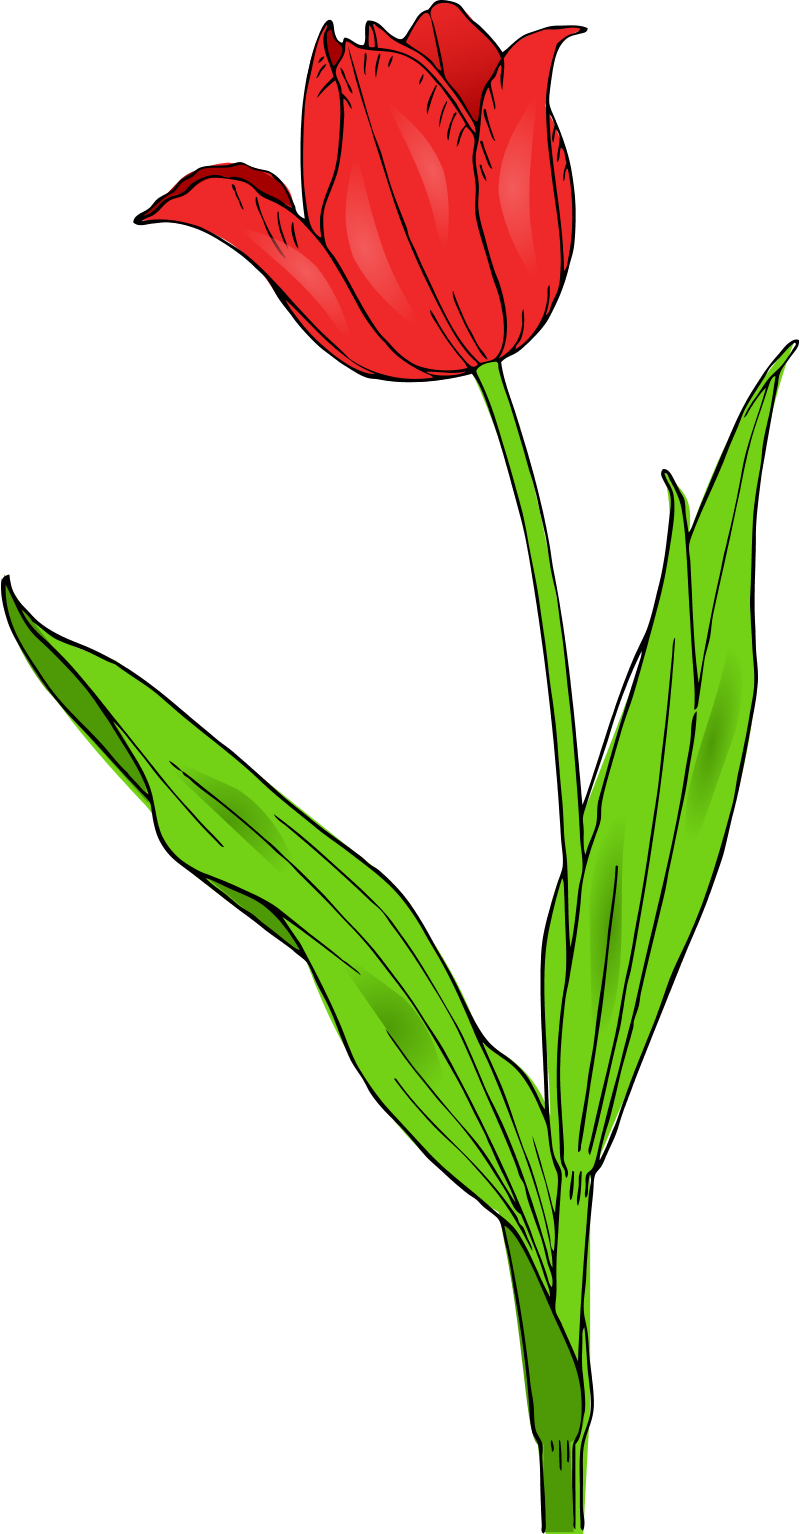 Spring Flowers Clipart - ClipArt Best